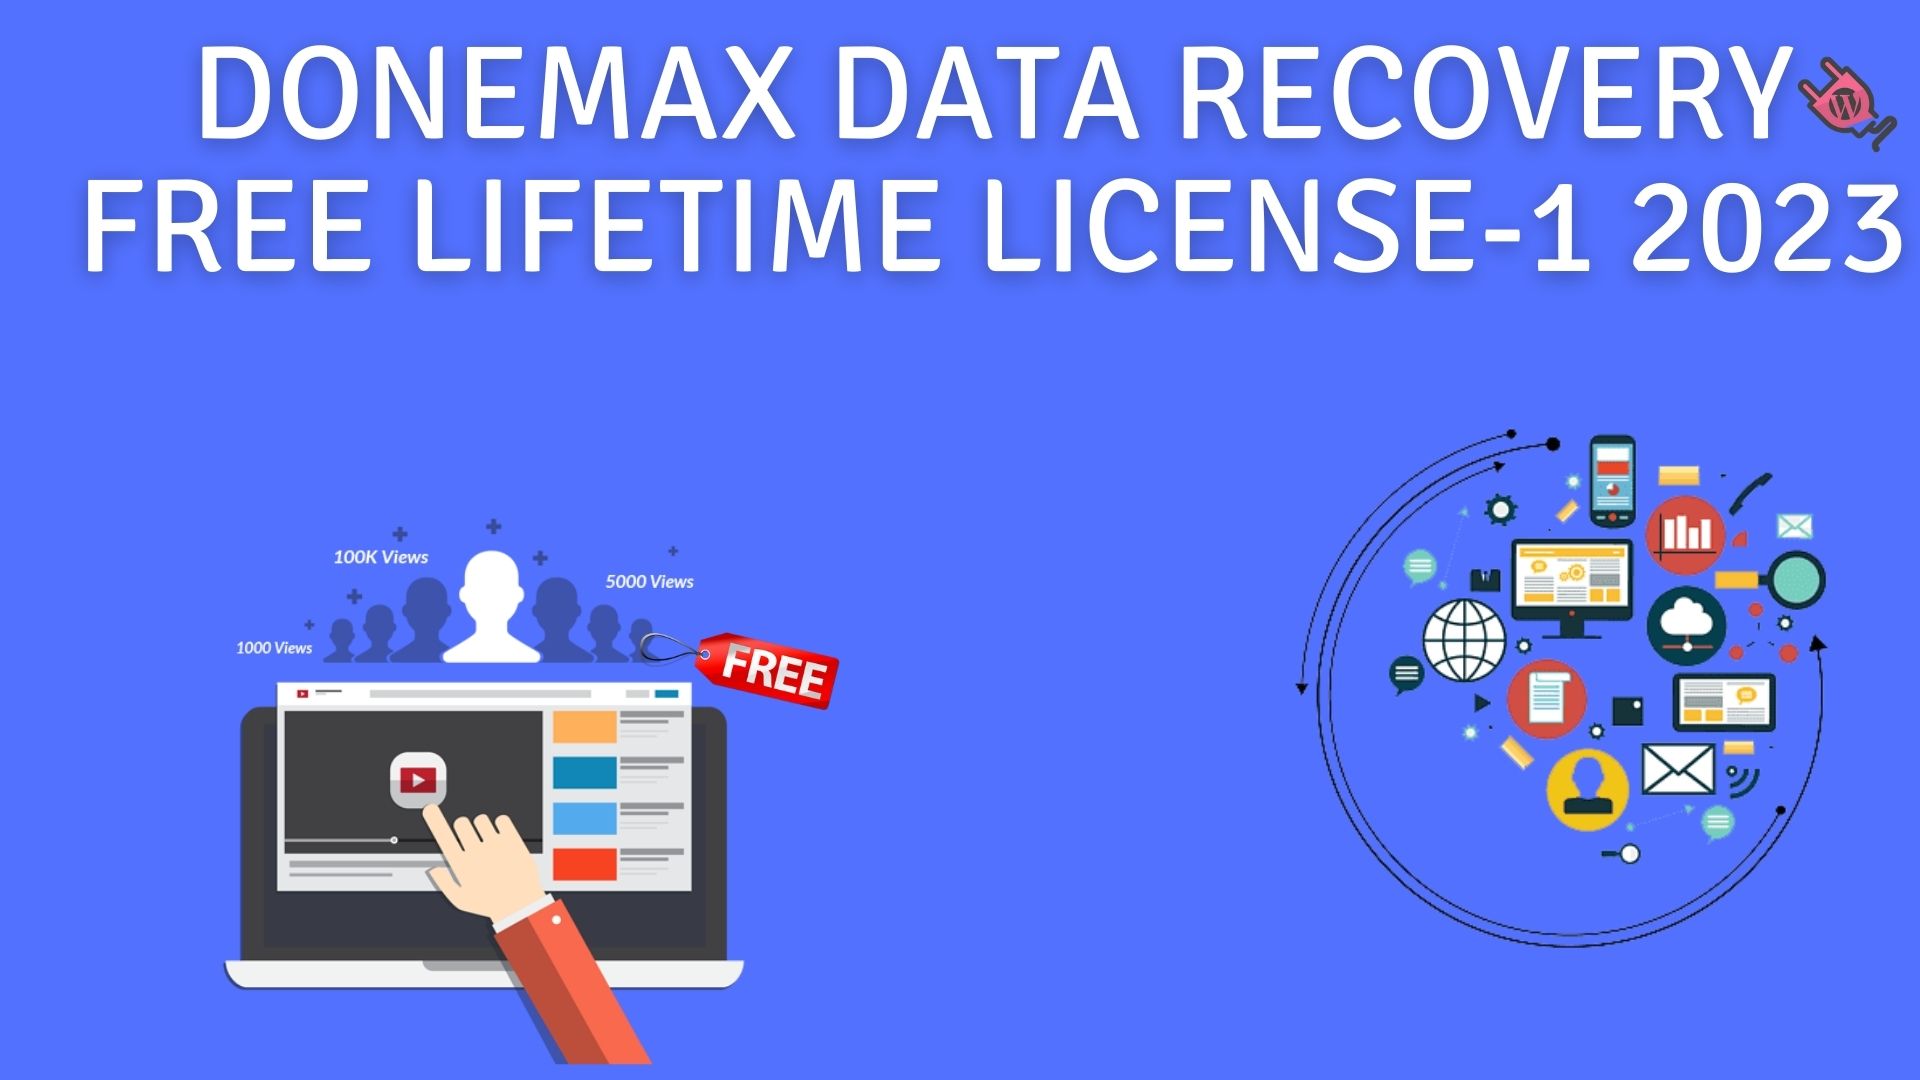 Donemax data recovery free lifetime license-1 2023